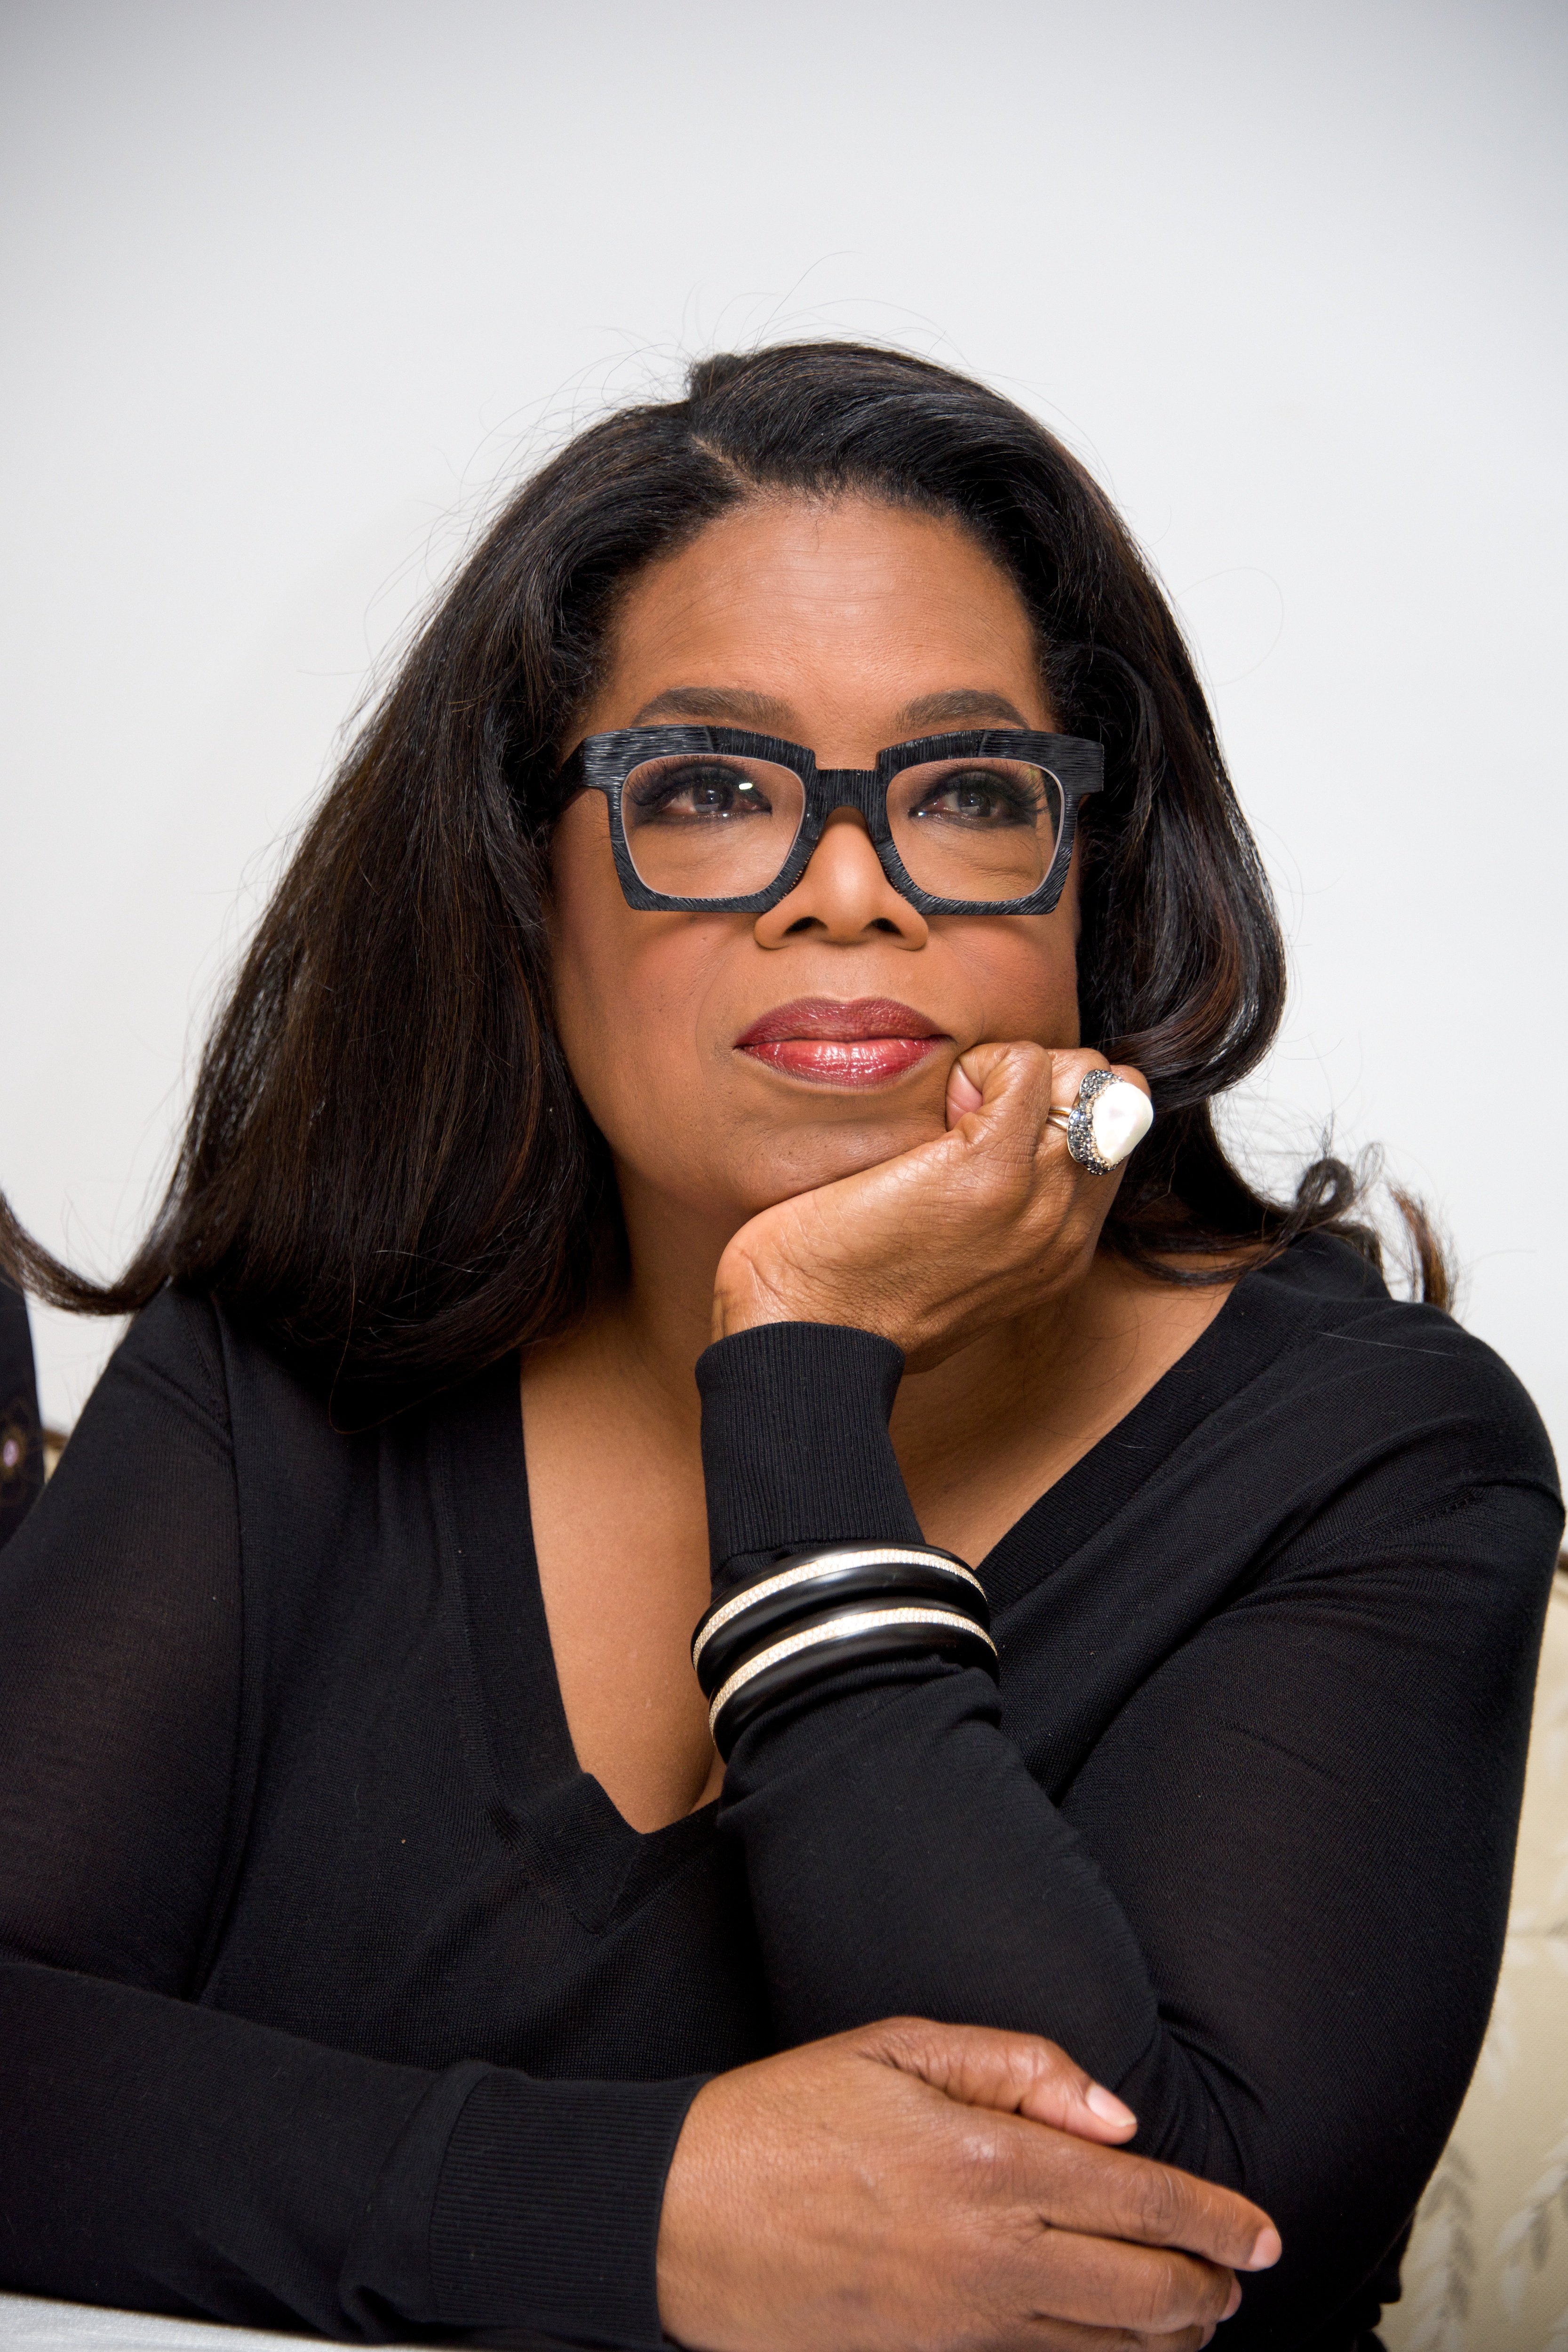 Media mogul Oprah Winfrey at the "Greenleaf" Press Conference held at the Four Seasons Hotel on September 26, 2016 in Beverly Hills, California. / Source: Getty Images